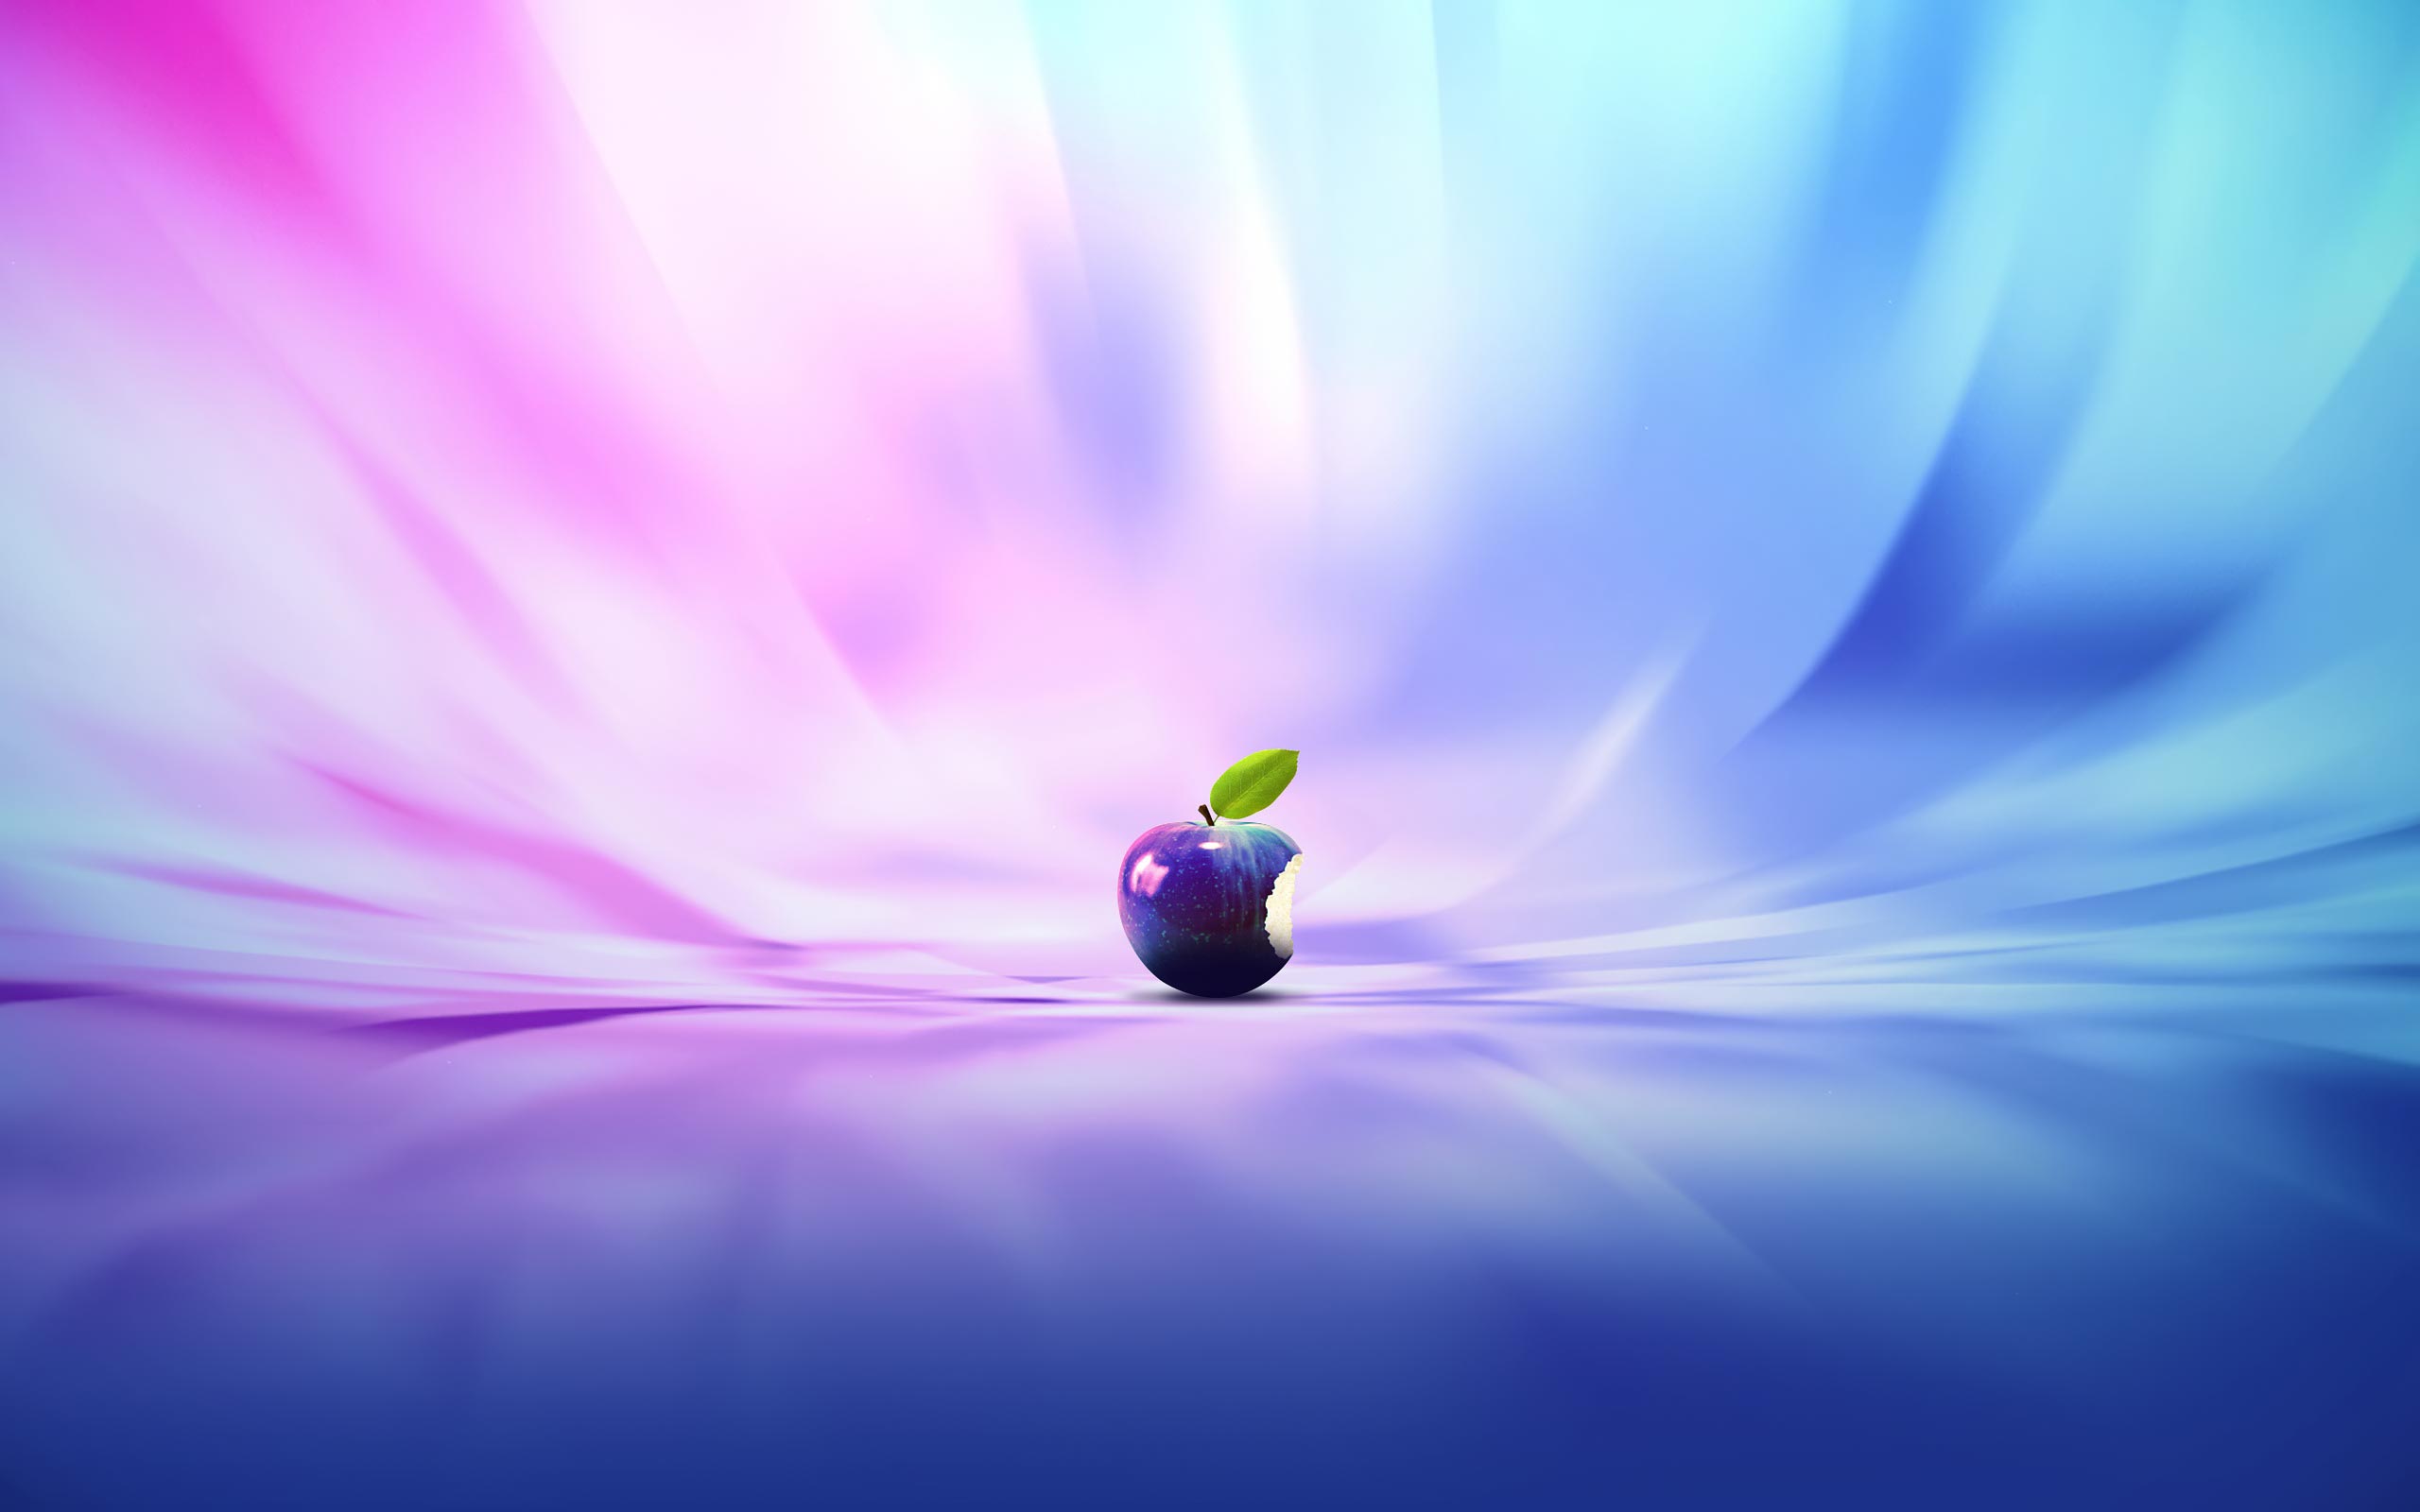 Apple Macbook Pro Wallpaper And Make This For Your Desktop